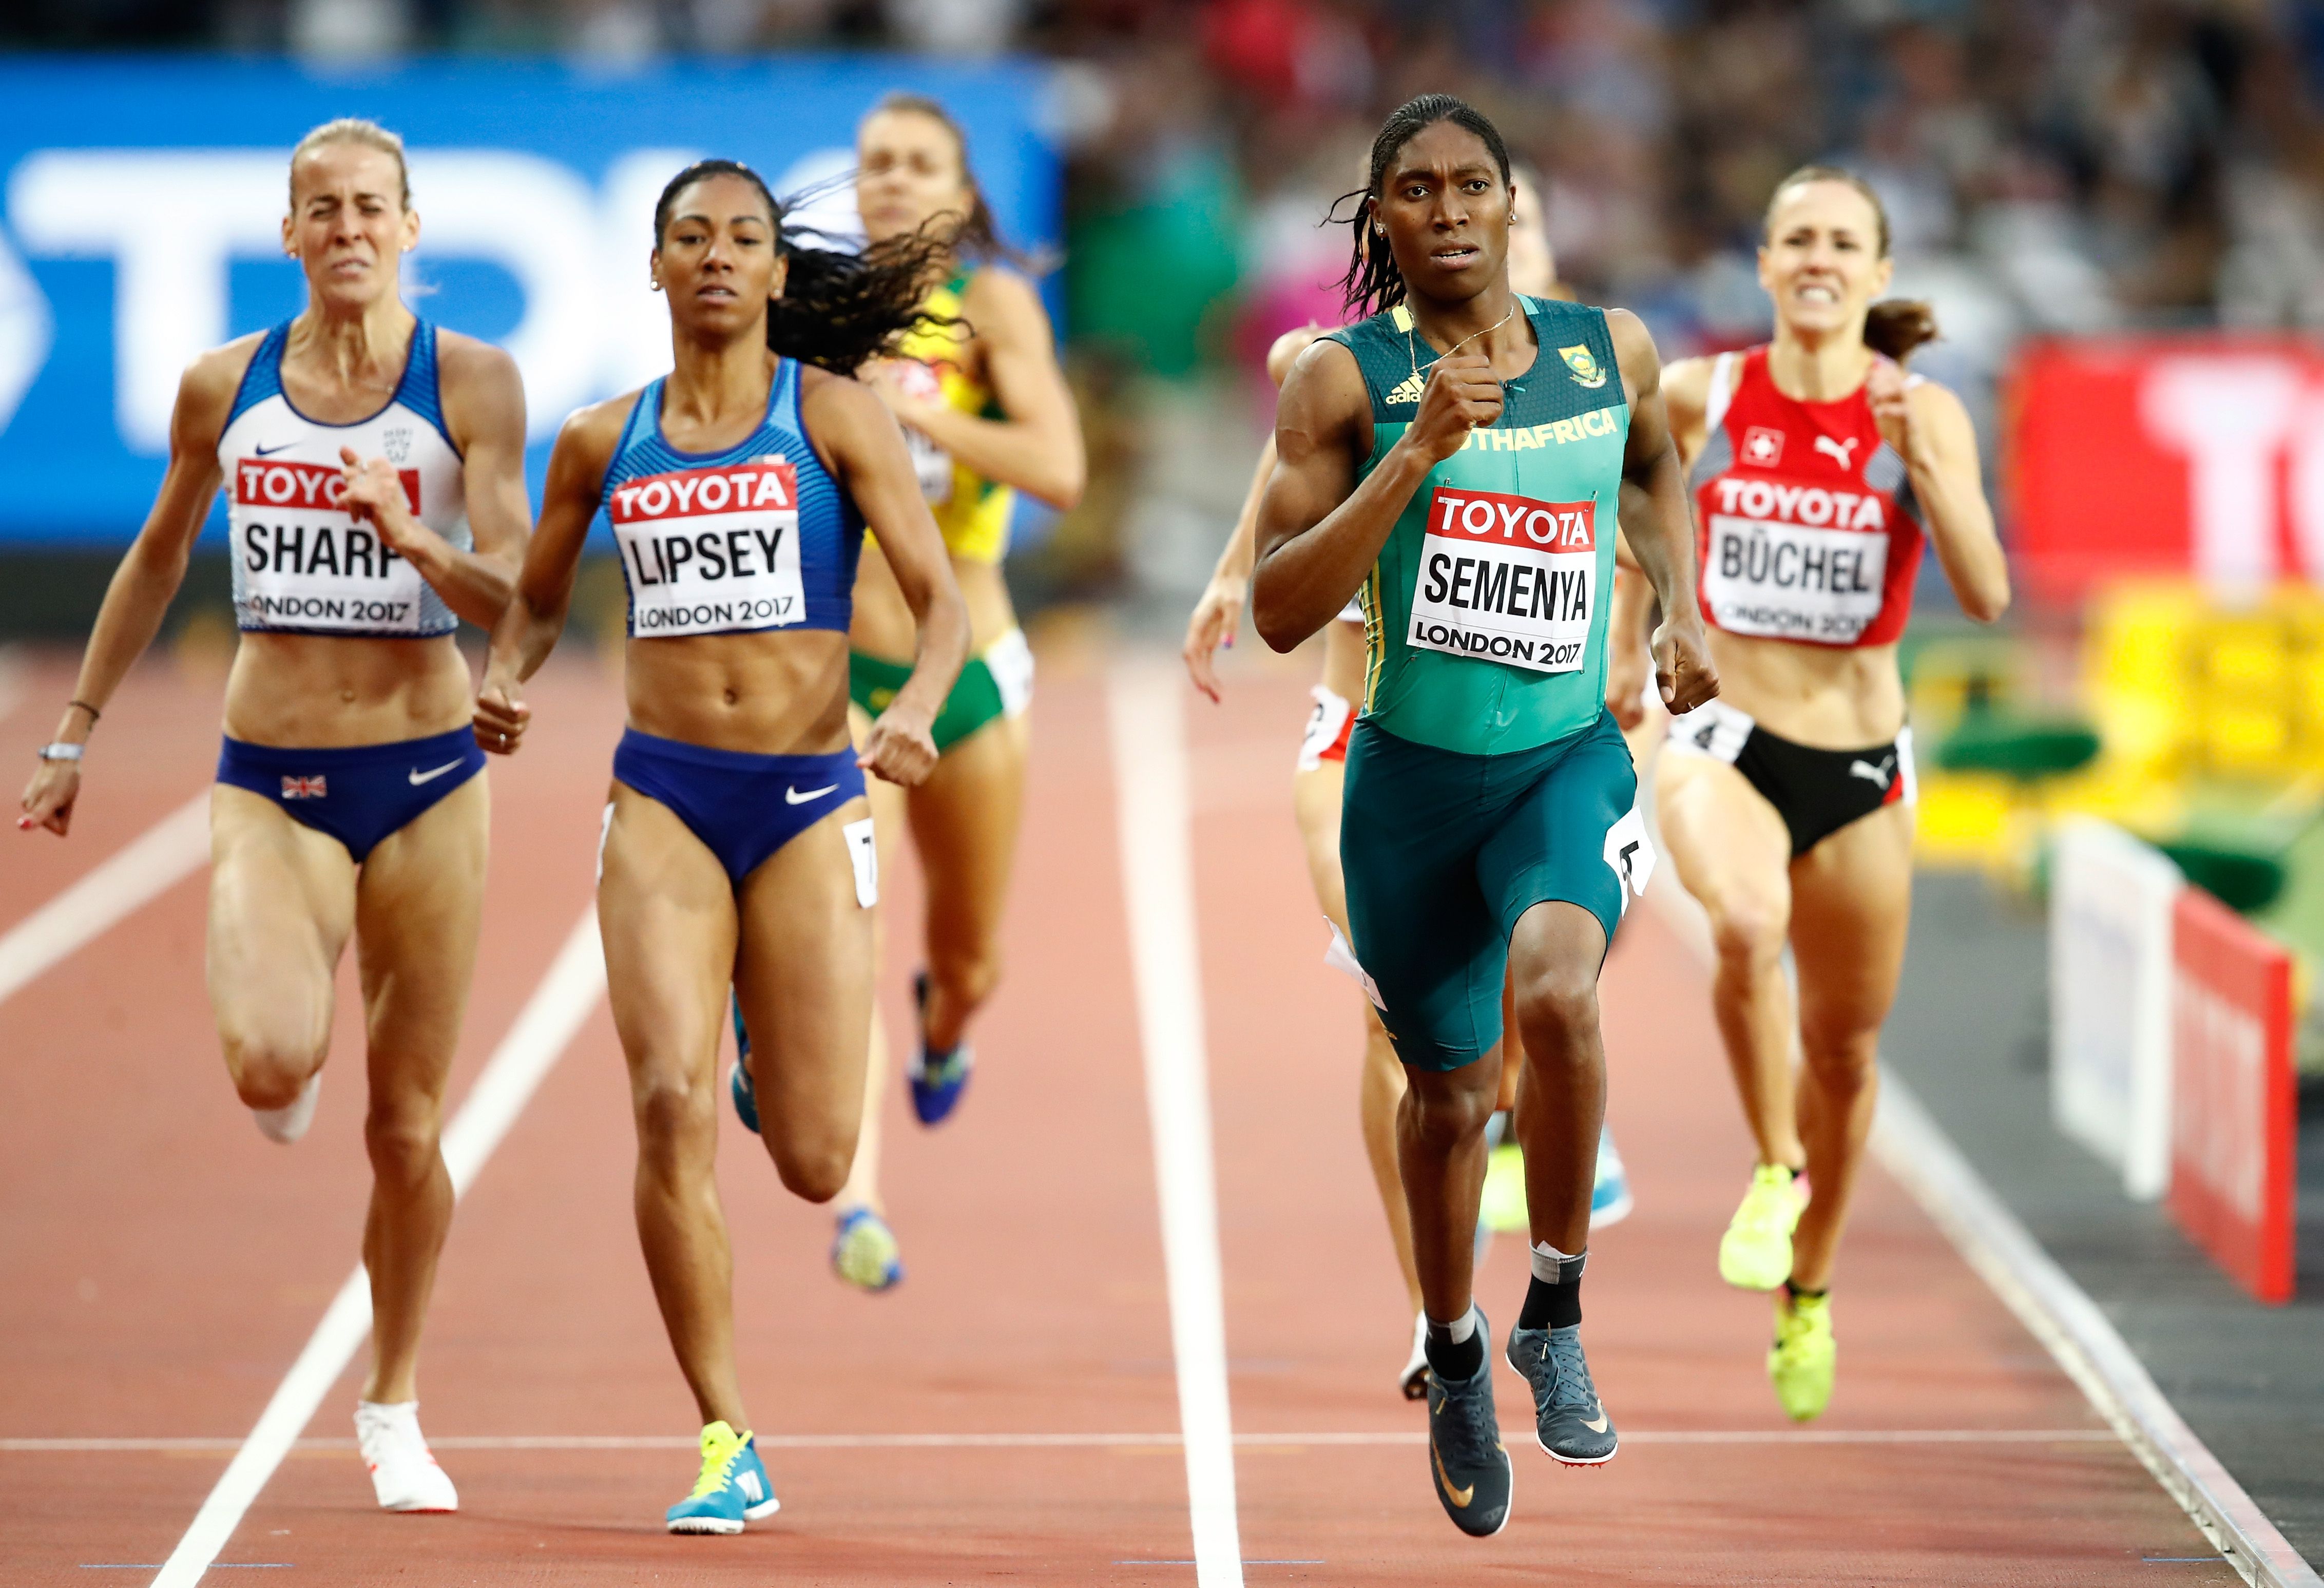 Should Caster Semenya be allowed to compete against women?